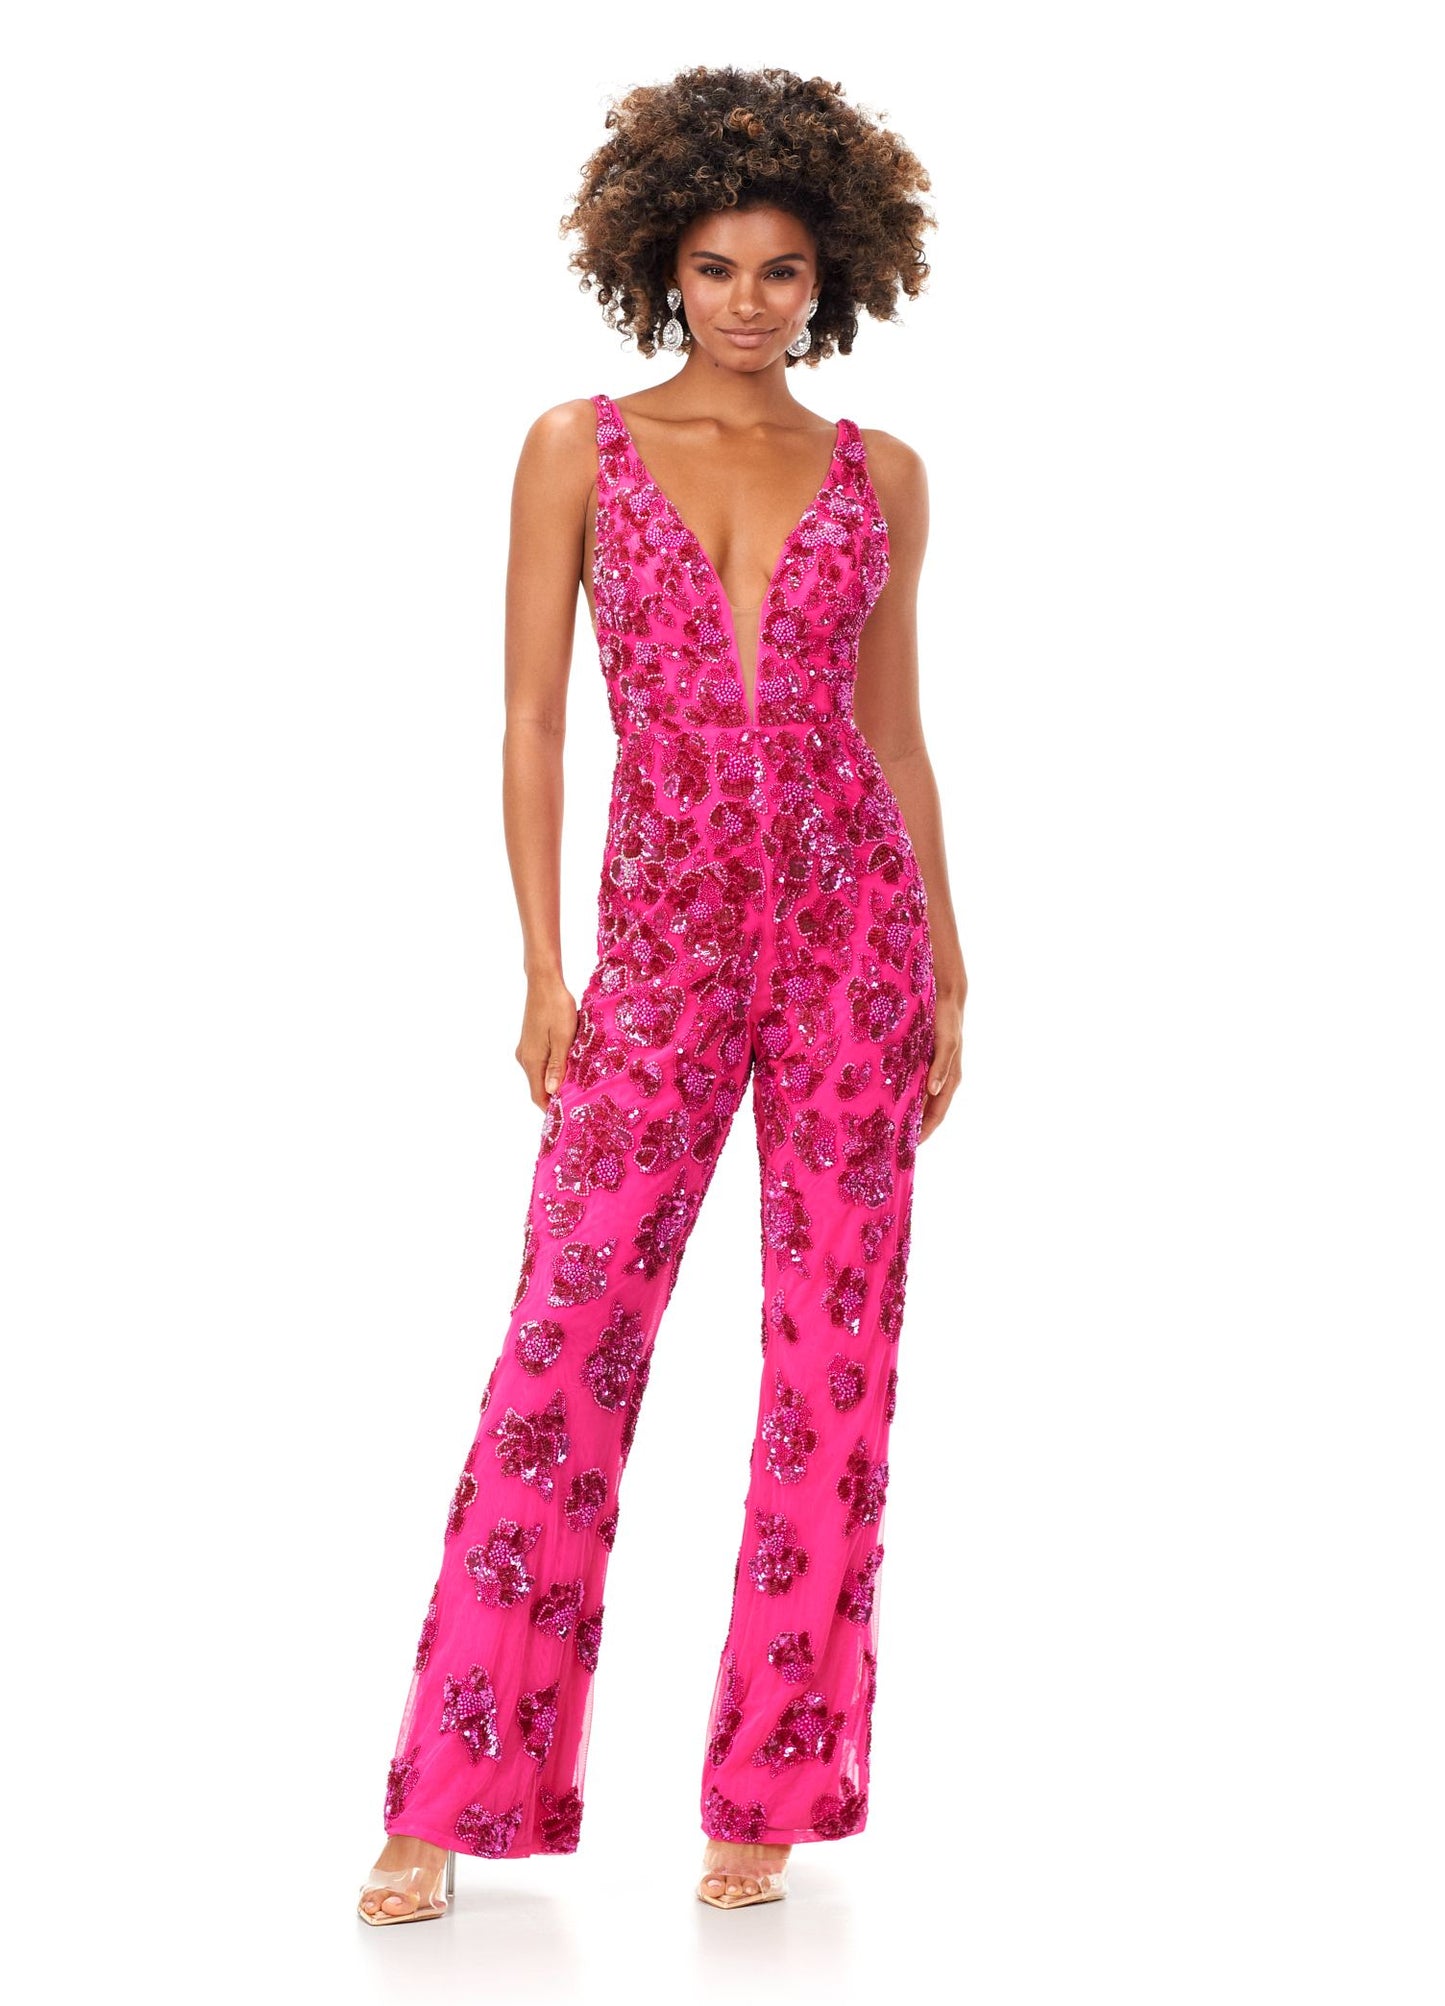 Ashley Lauren 11355 This v-neckline jumpsuit features an intricate floral inspired bead pattern throughout. The look is complete with a v-back and straight leg pants. V-Neckline V-Back Straight Leg Pants Fully Hand Beaded COLORS: Ivory, Neon Pink, Royal